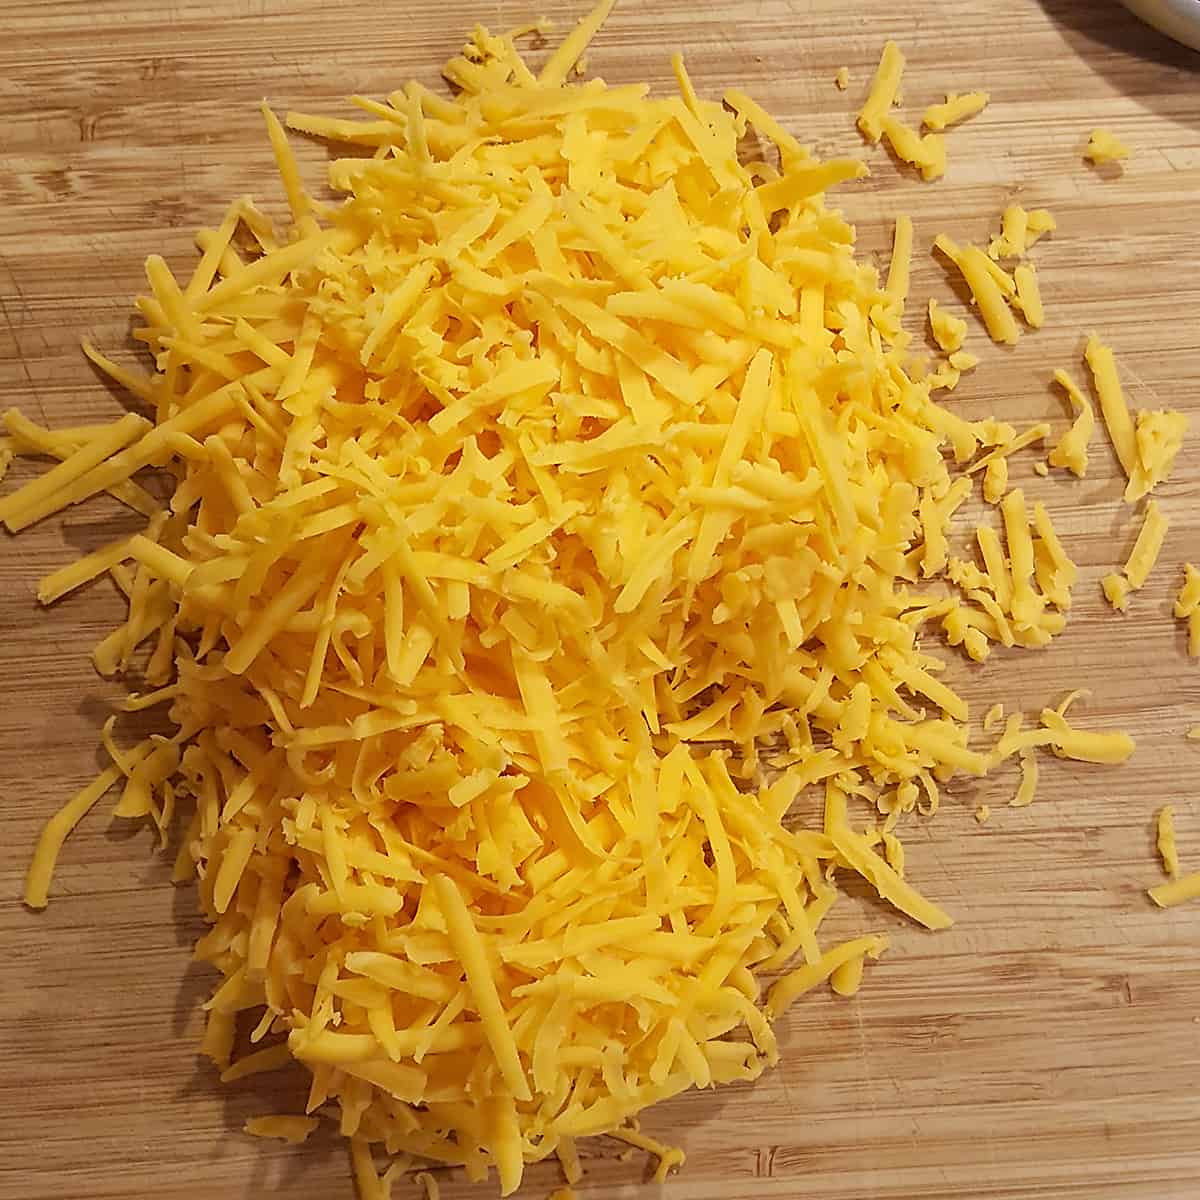 Grated Cheddar cheese on a cutting board.